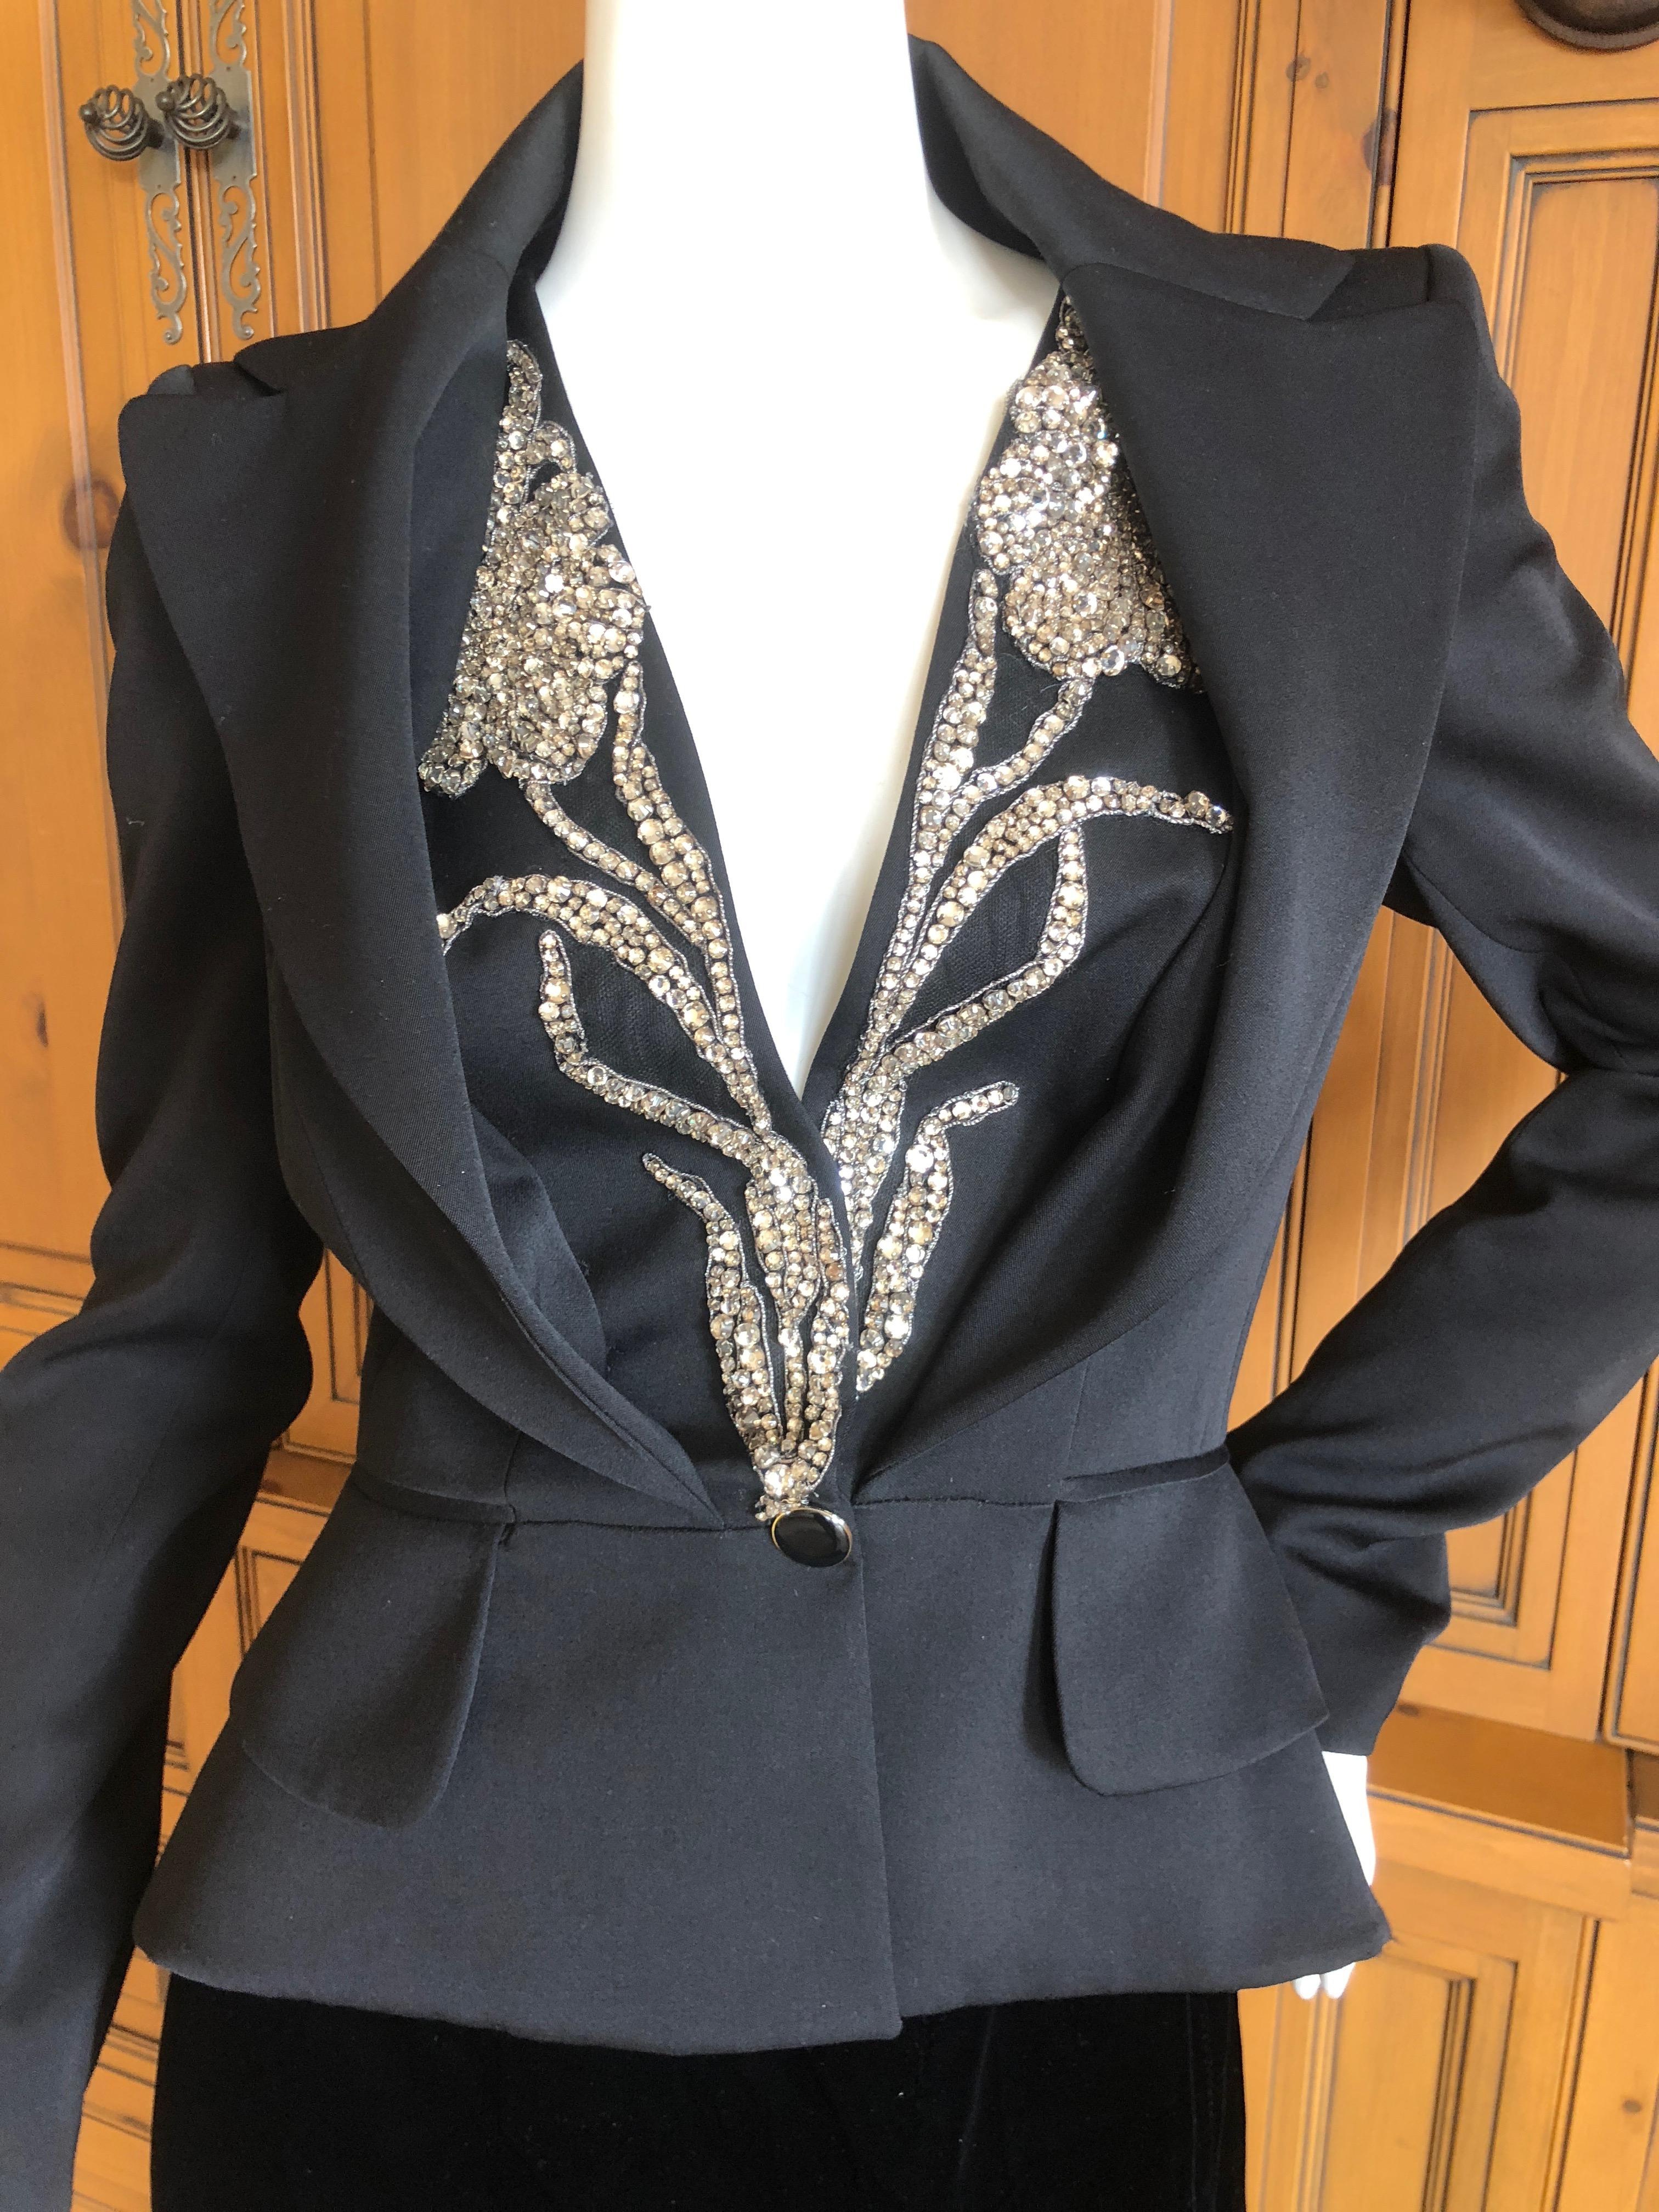 Alexander McQueen Black Tailored Tailcoat with Crystal Embellished Floral Lapels For Sale 2